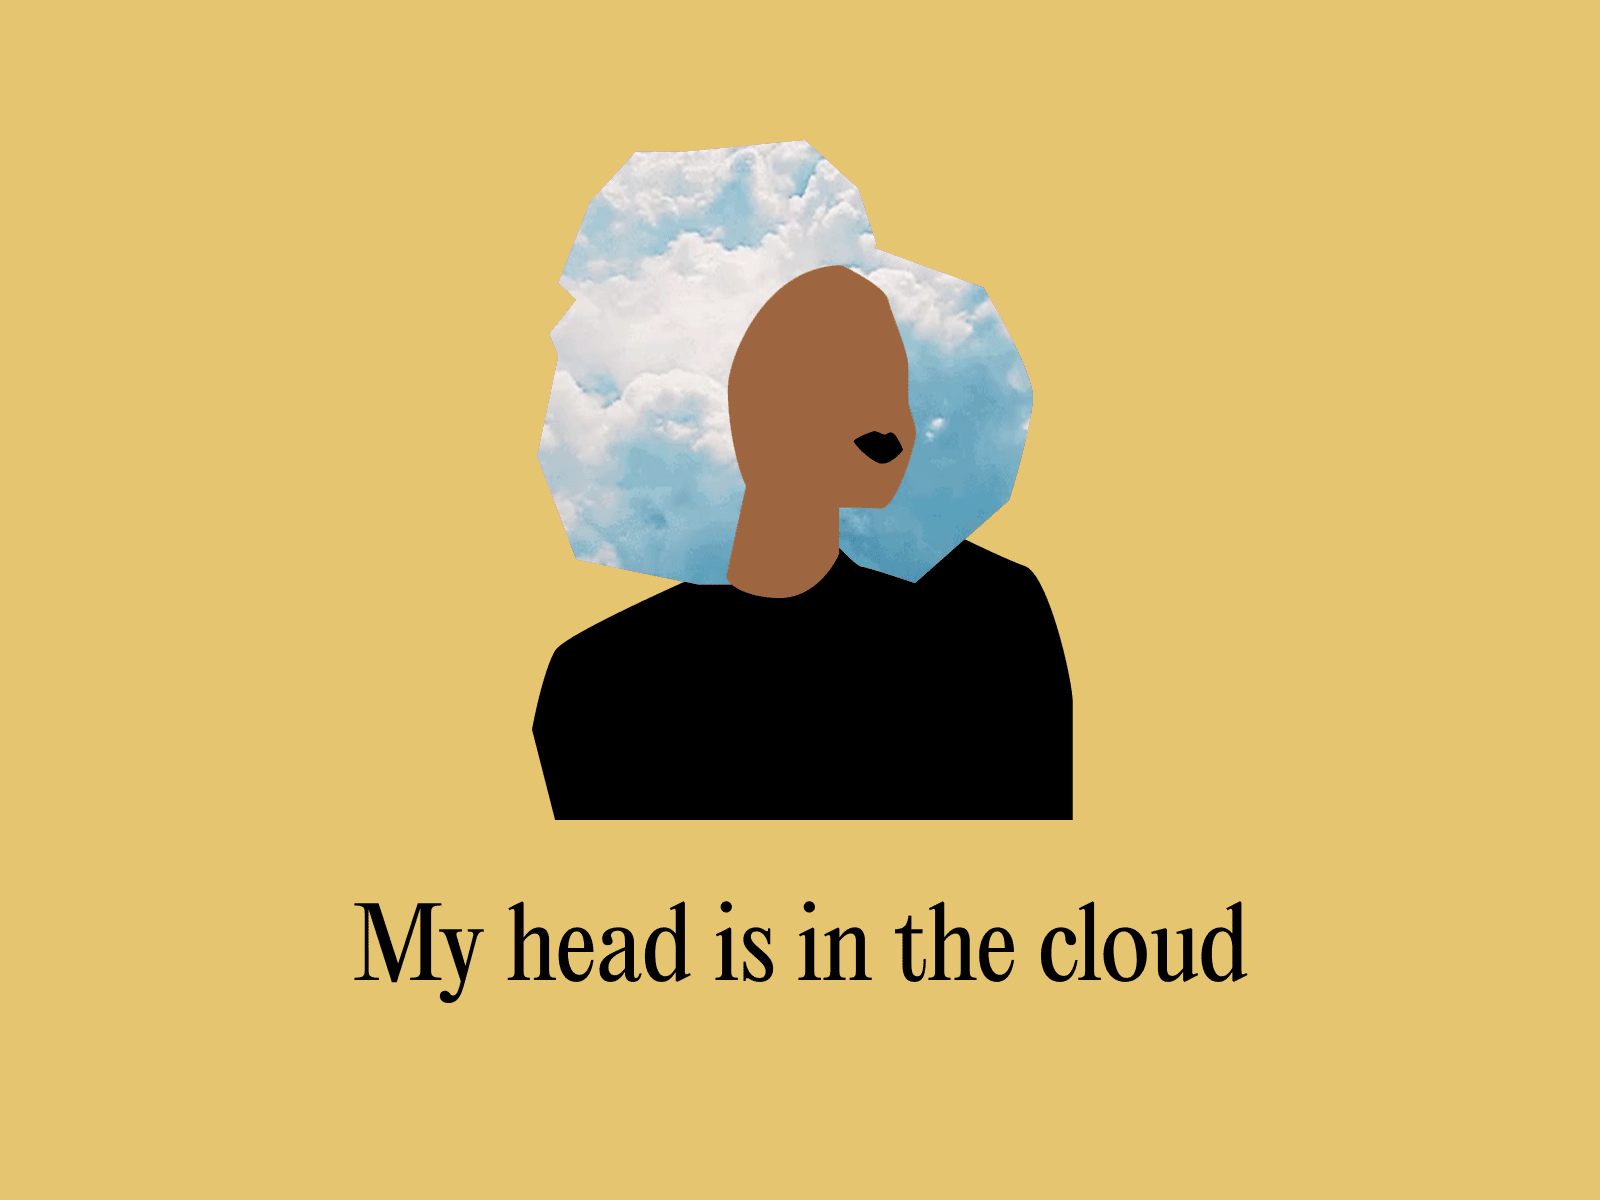 My head is in the cloud design